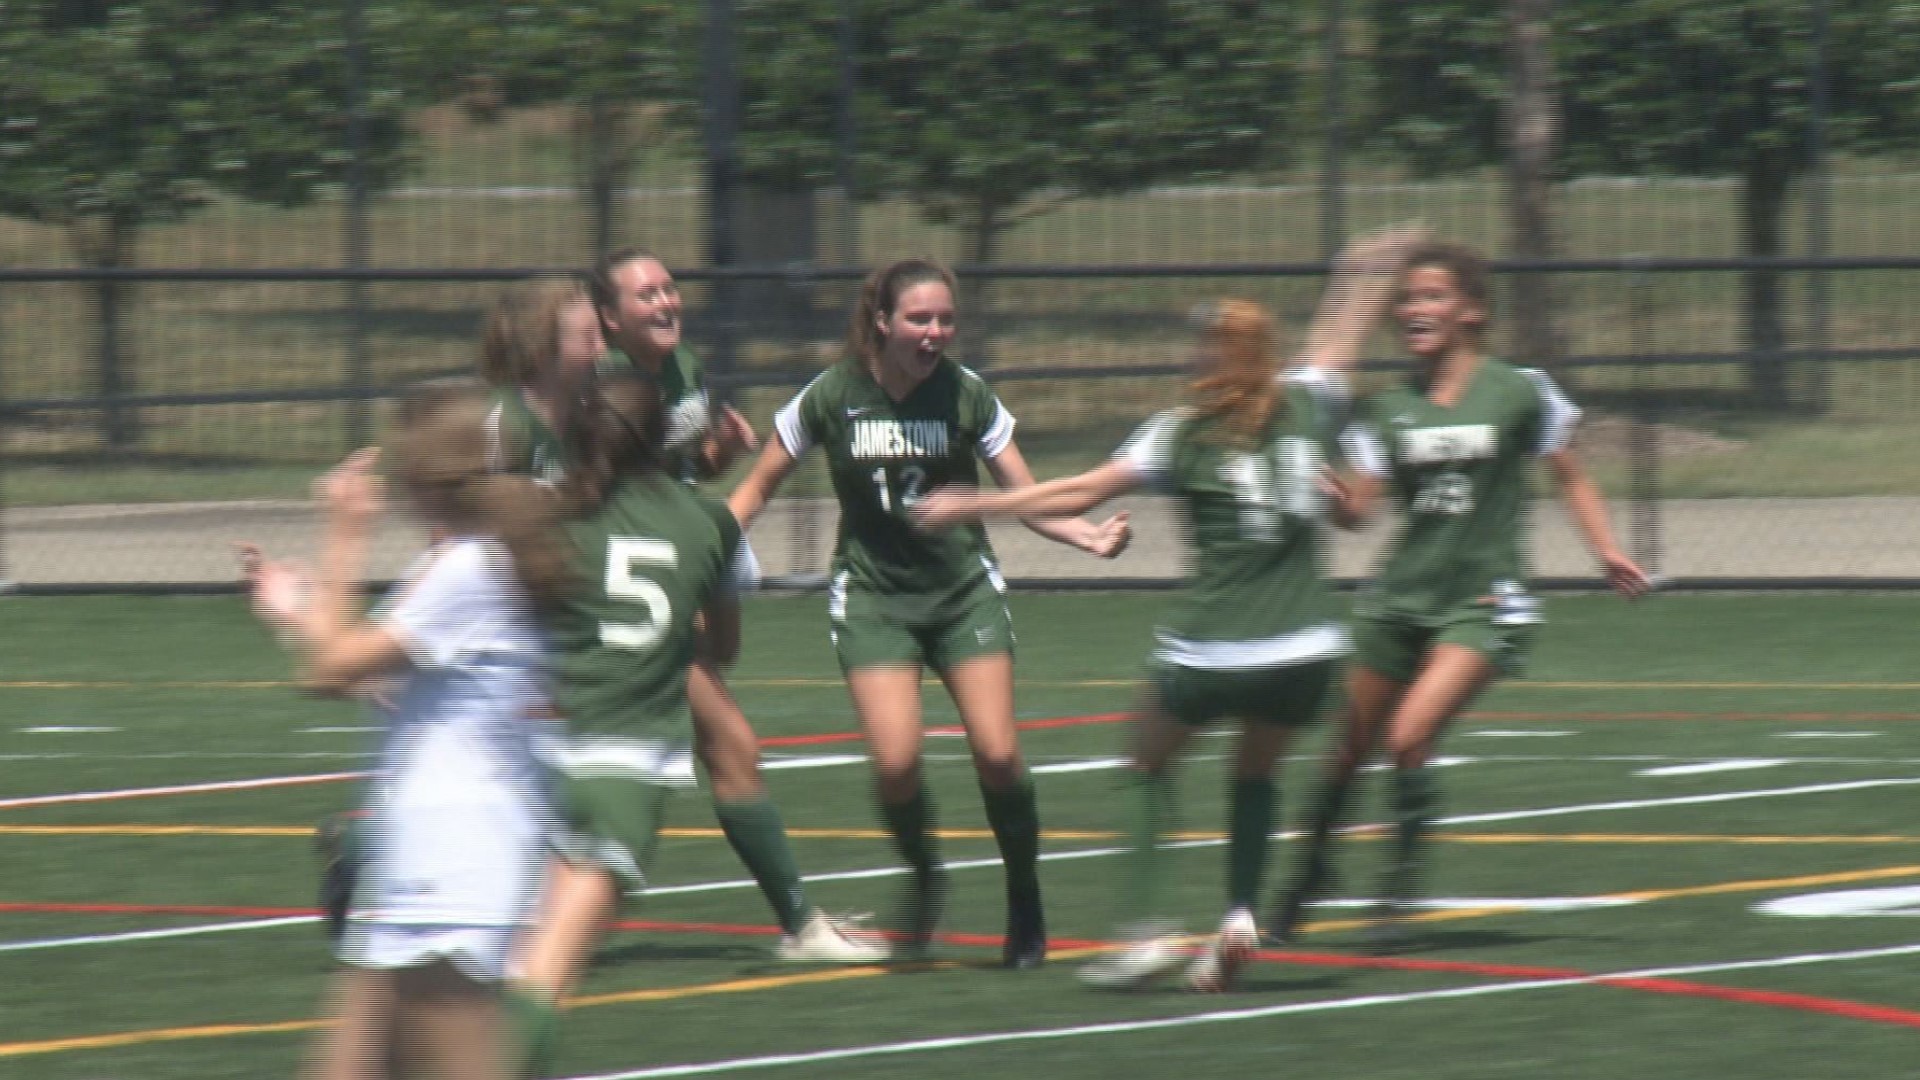 Brianna Behm's goal in double overtime sent the Jamestown girls soccer team to the state semifinals.